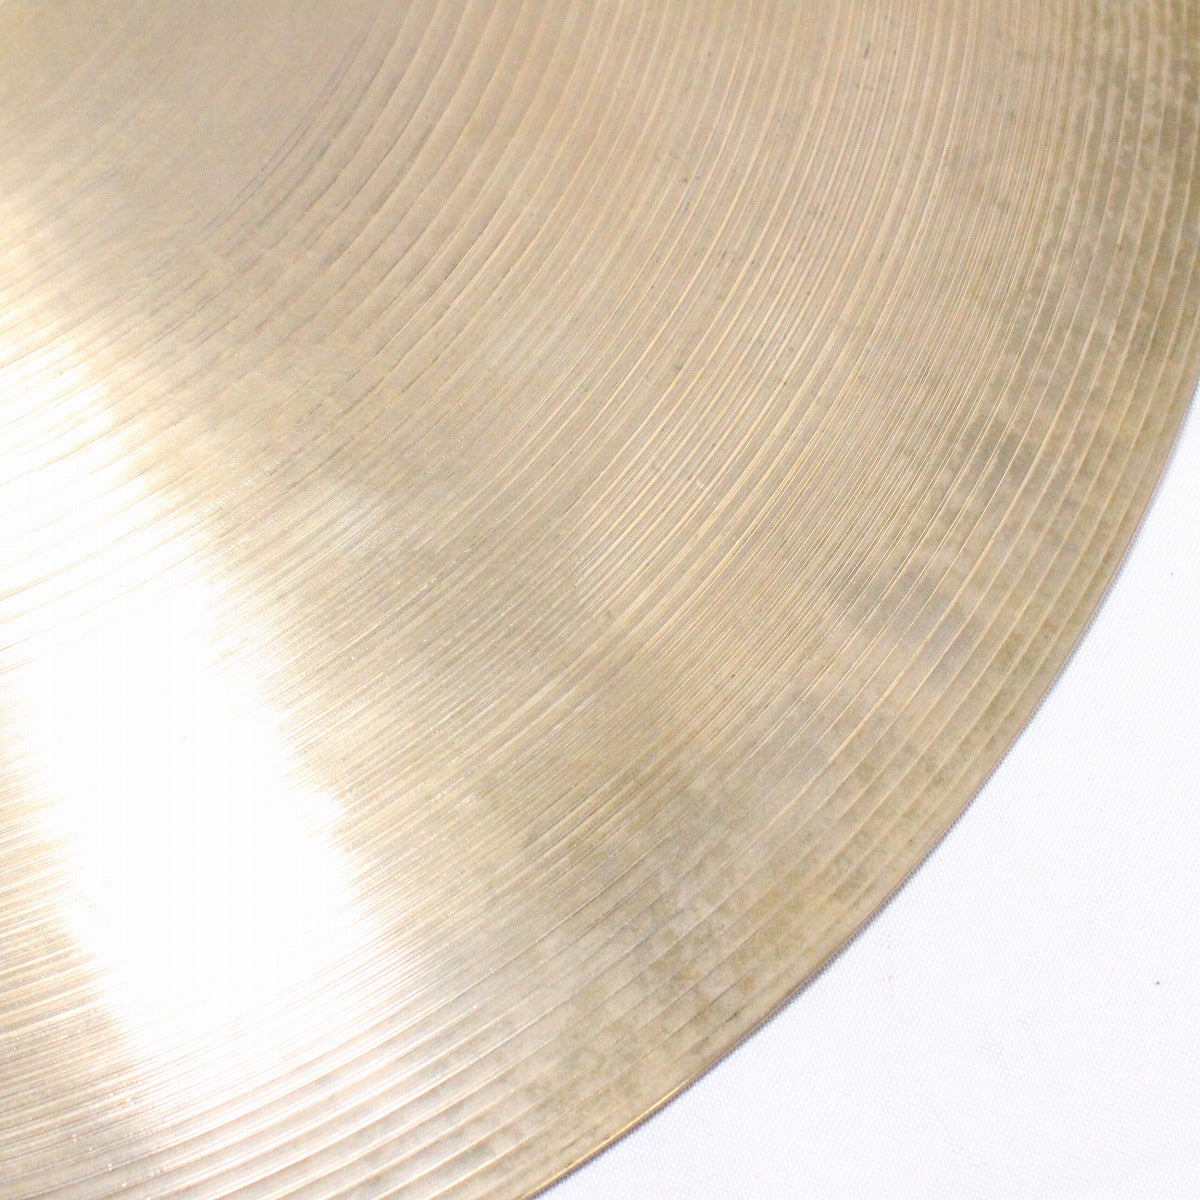 USED ZILDJIAN / Late50s A Small Stamp 20" 1992g Old A Ride Cymbal [08]